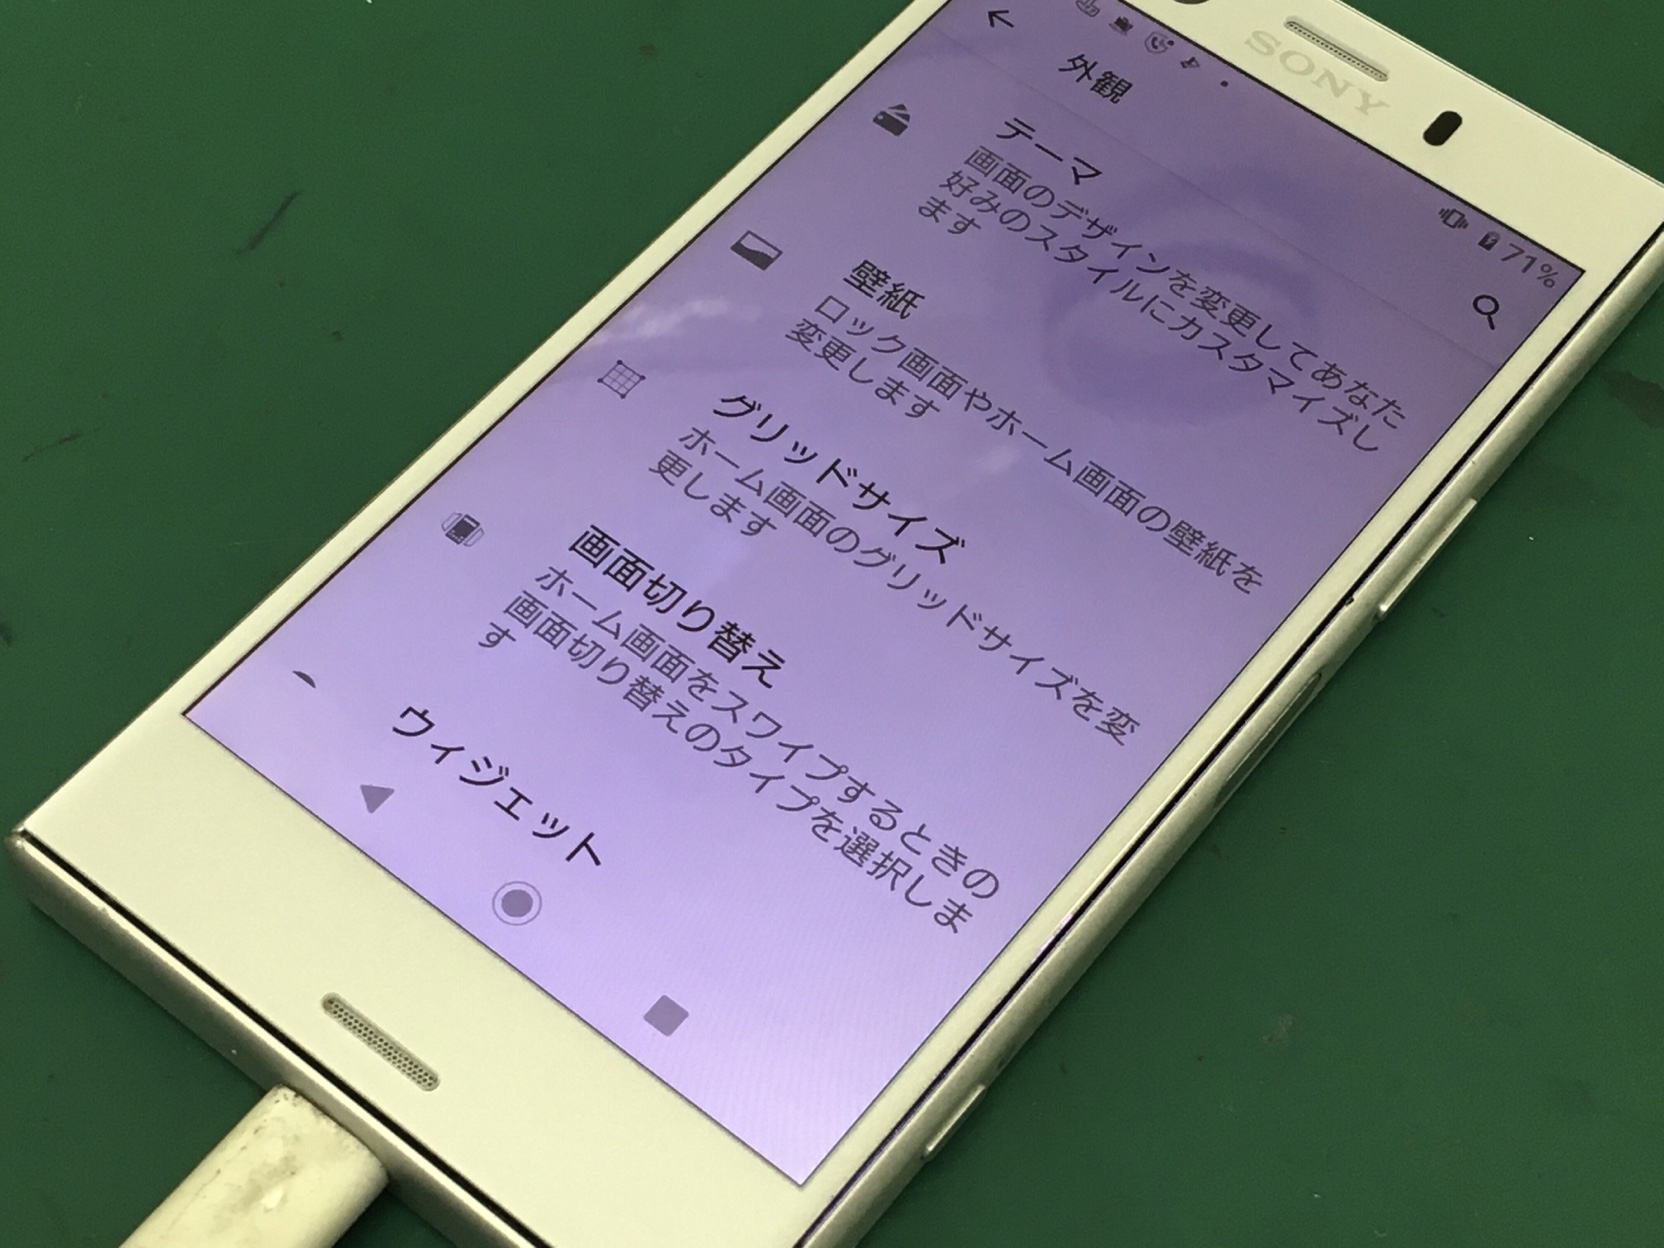 Xperia Xz1 Compact 後ろ側が膨らんできた 画面に滲みが出てきた 即日修理 スマホ修理王